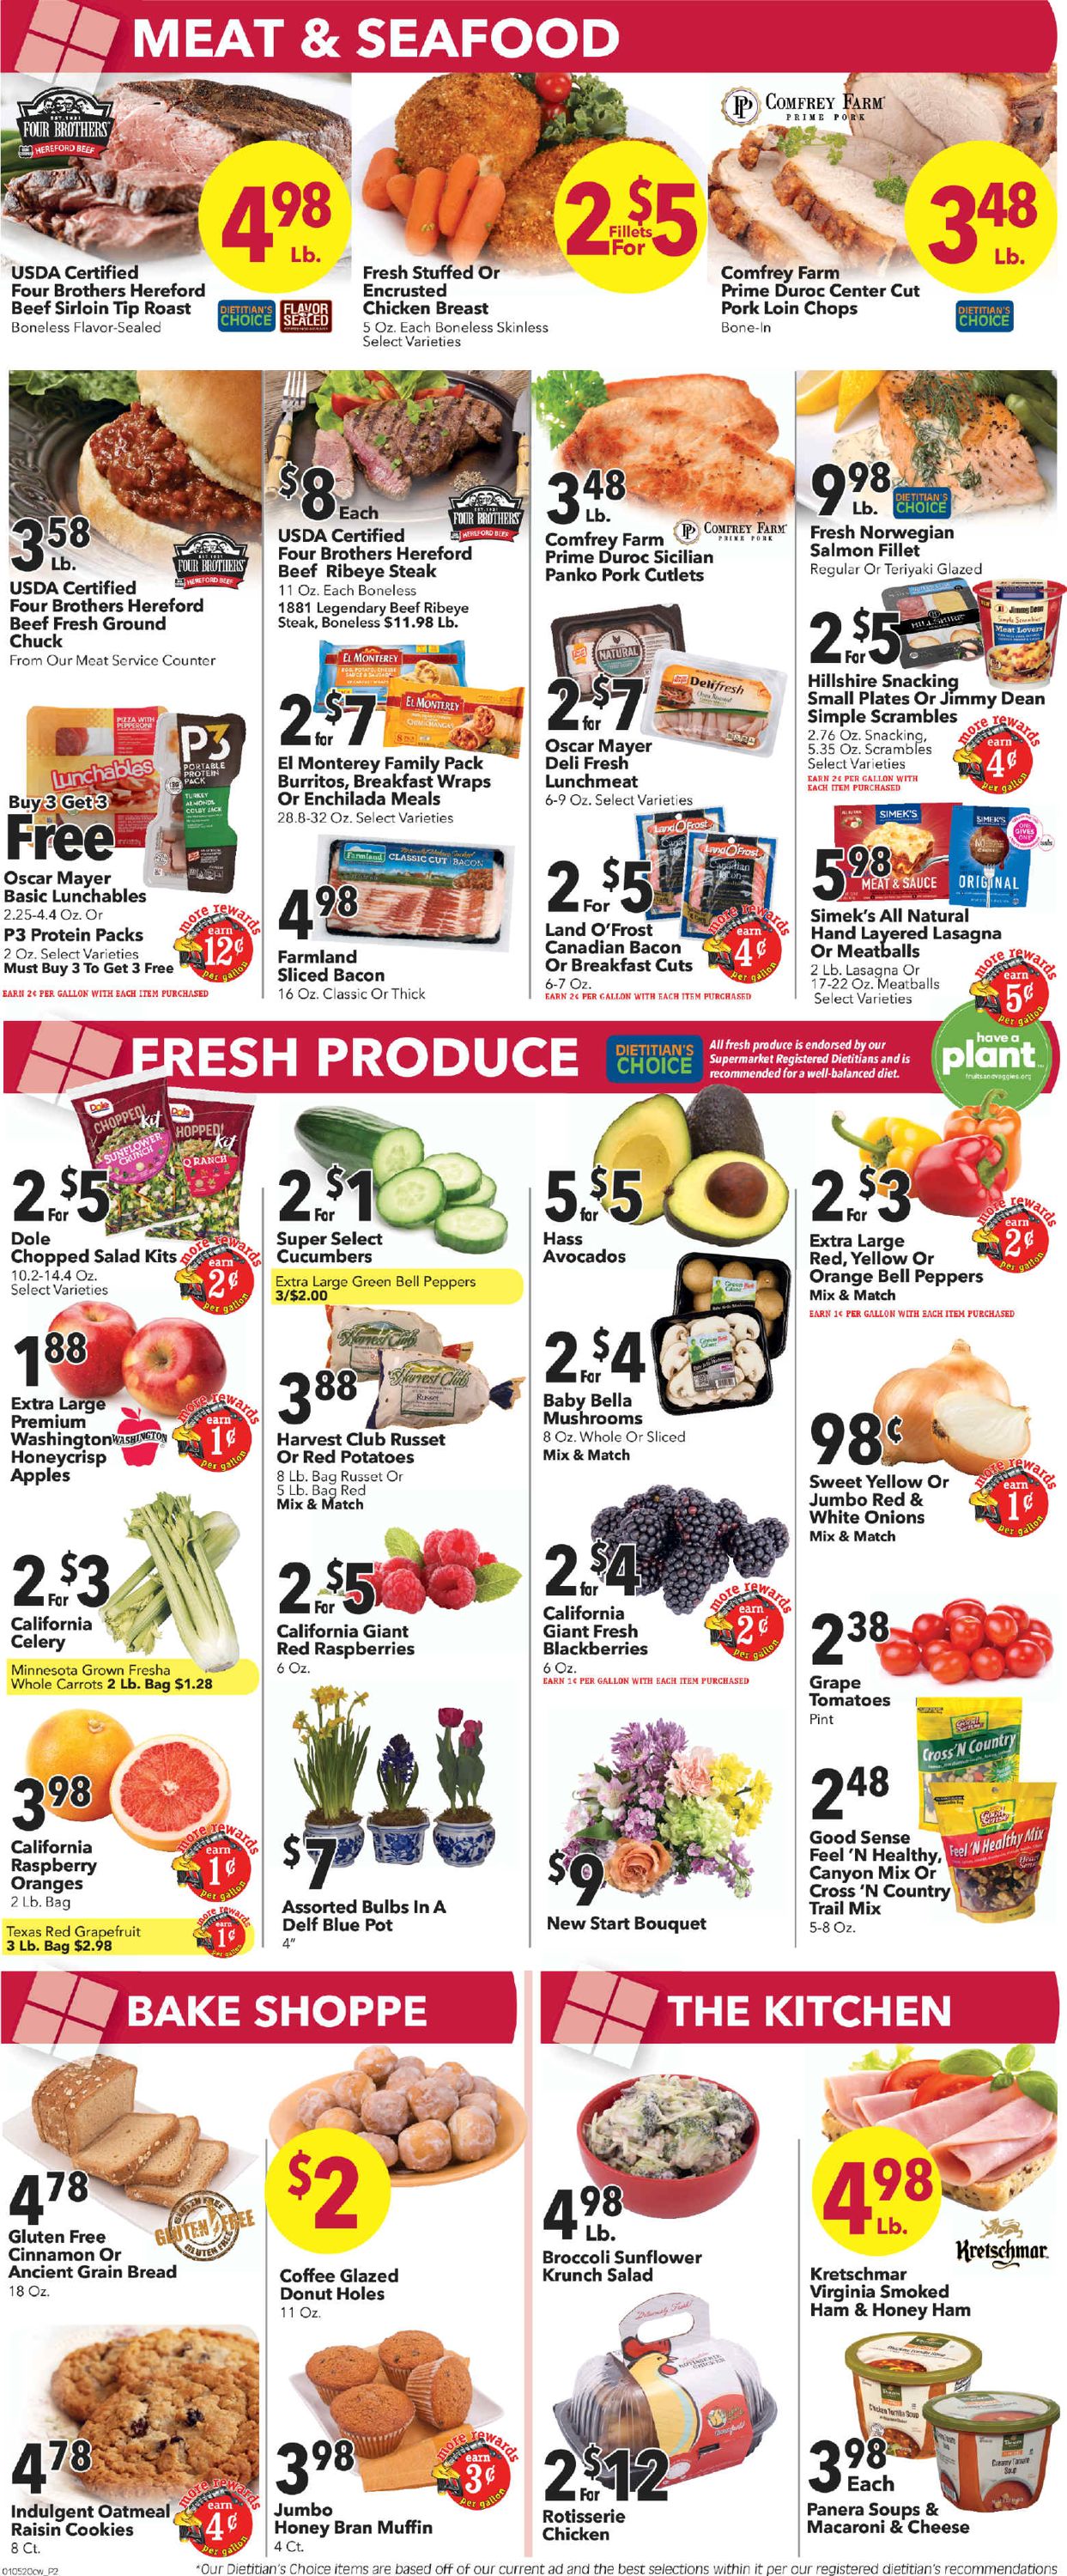 Cash Wise Weekly Ad Circular - valid 01/05-01/11/2020 (Page 2)